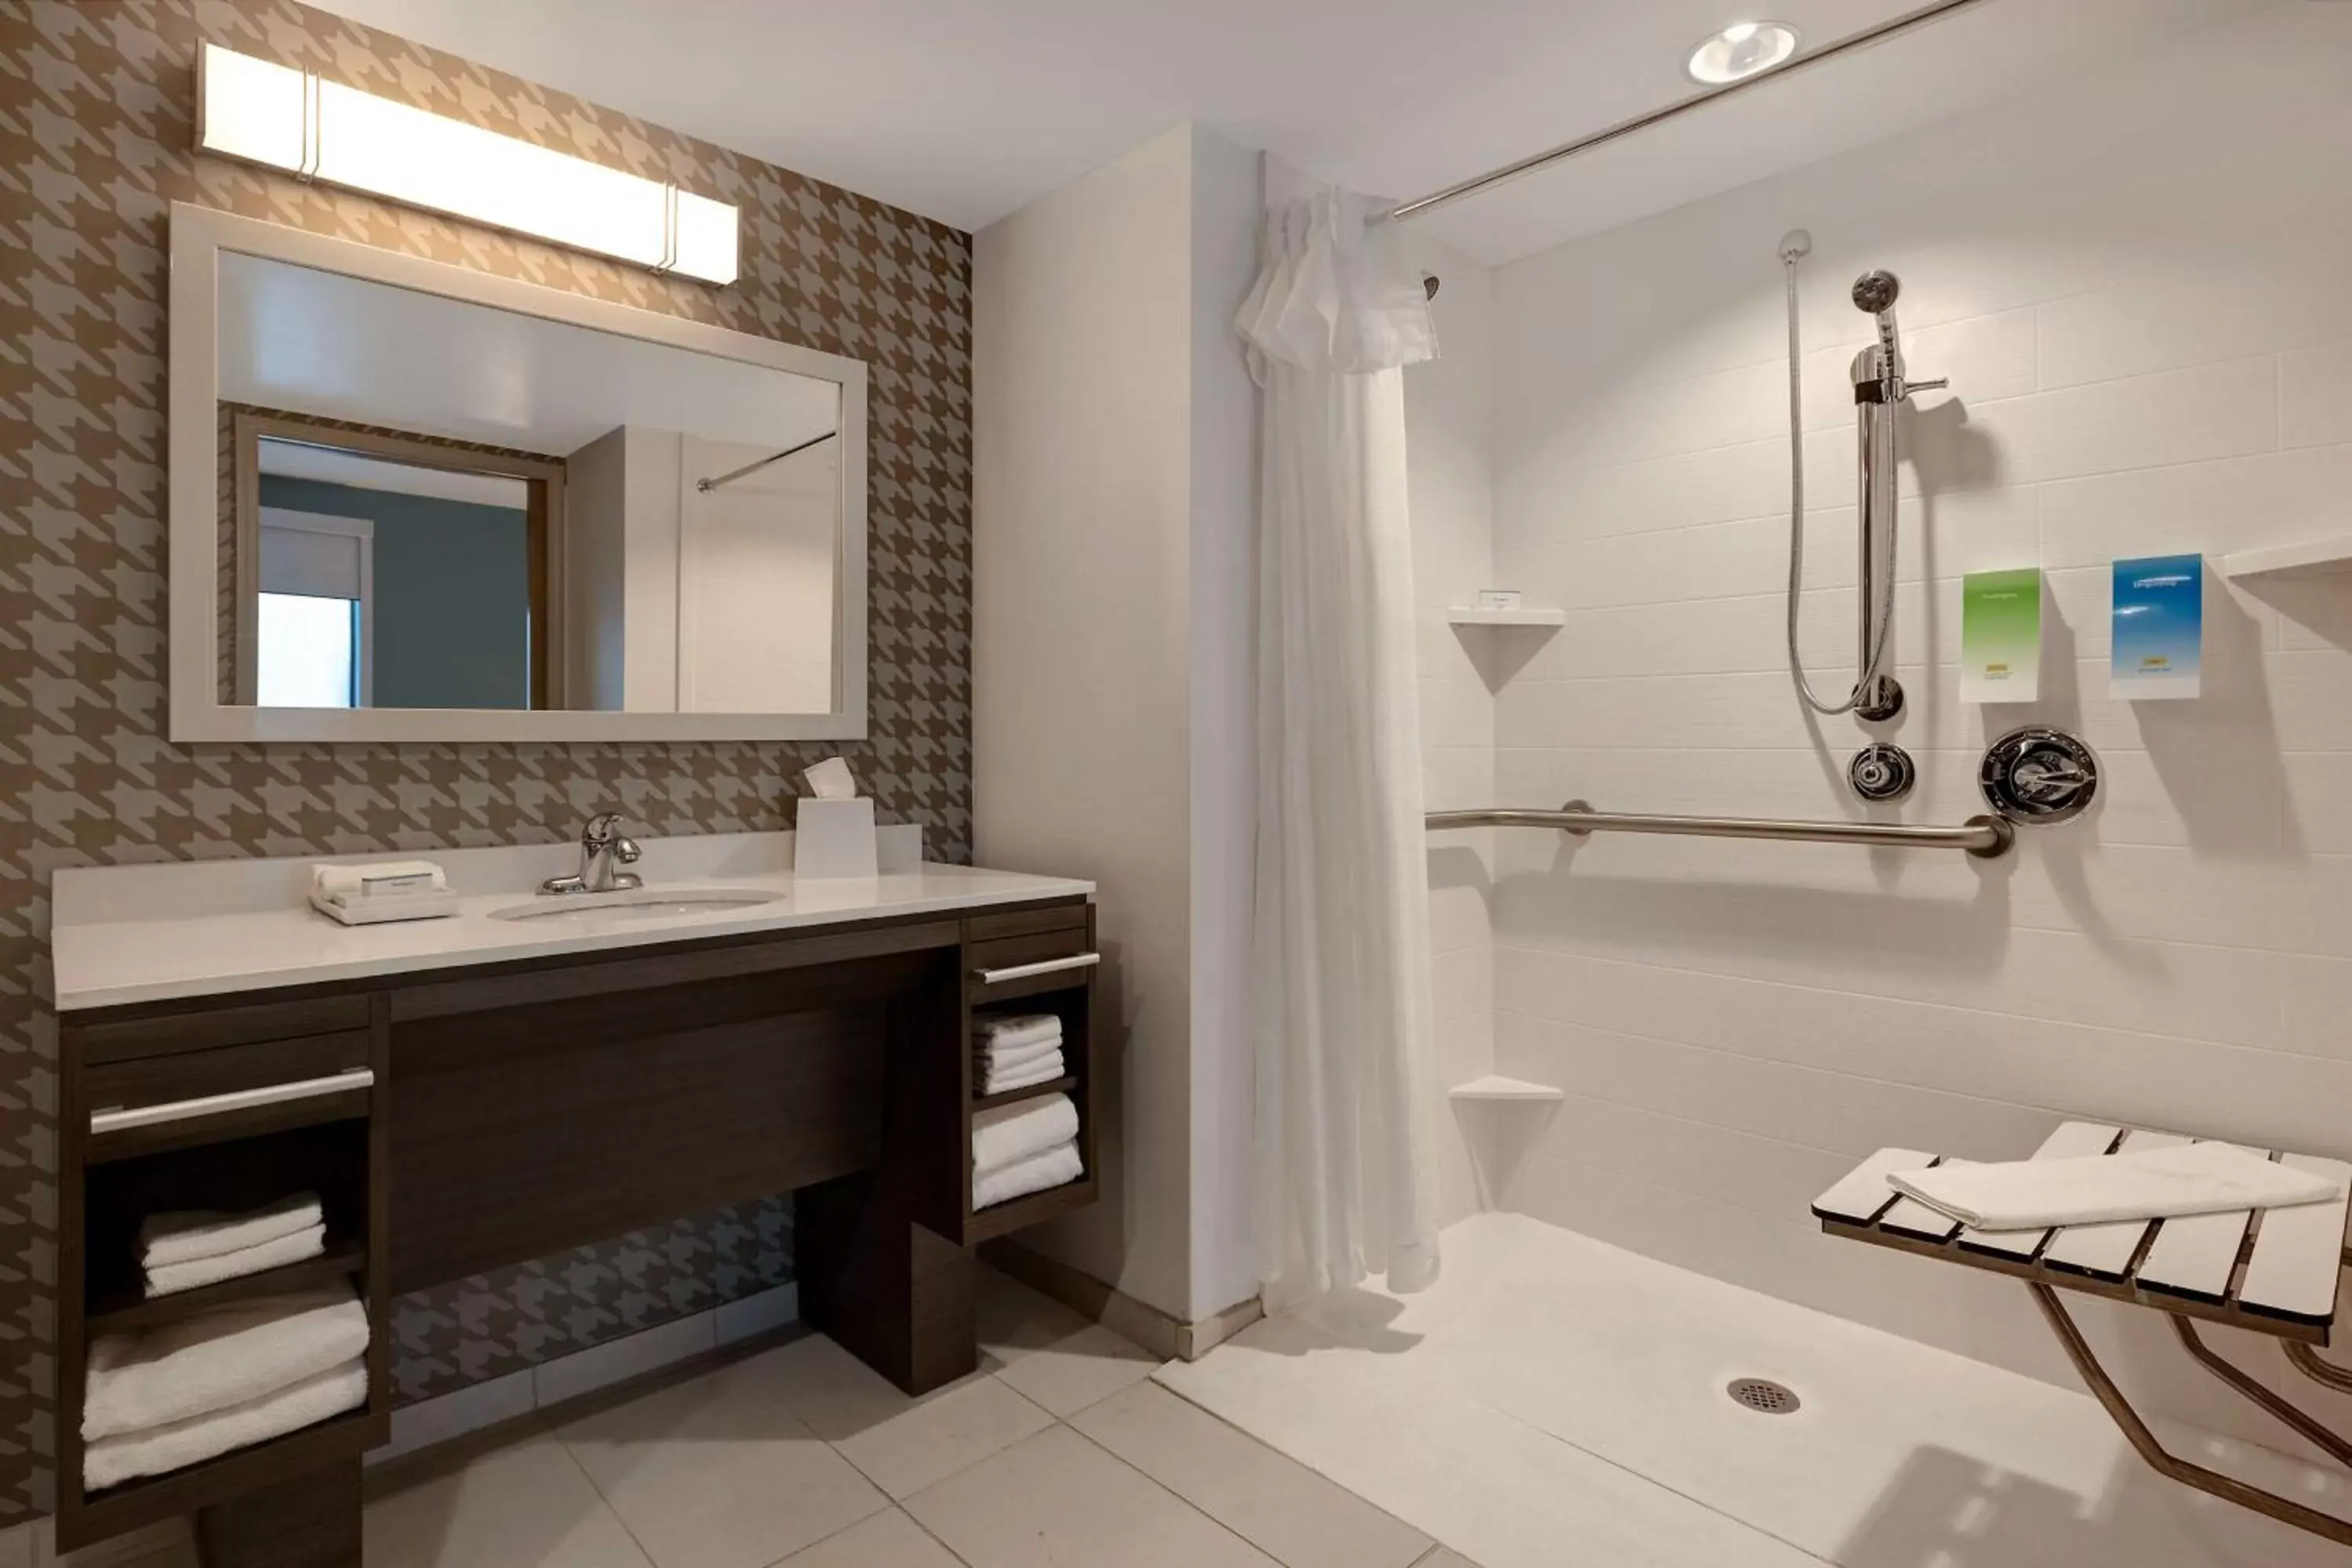 Bathroom in Home2 Suites by Hilton Gulf Breeze Pensacola Area, FL